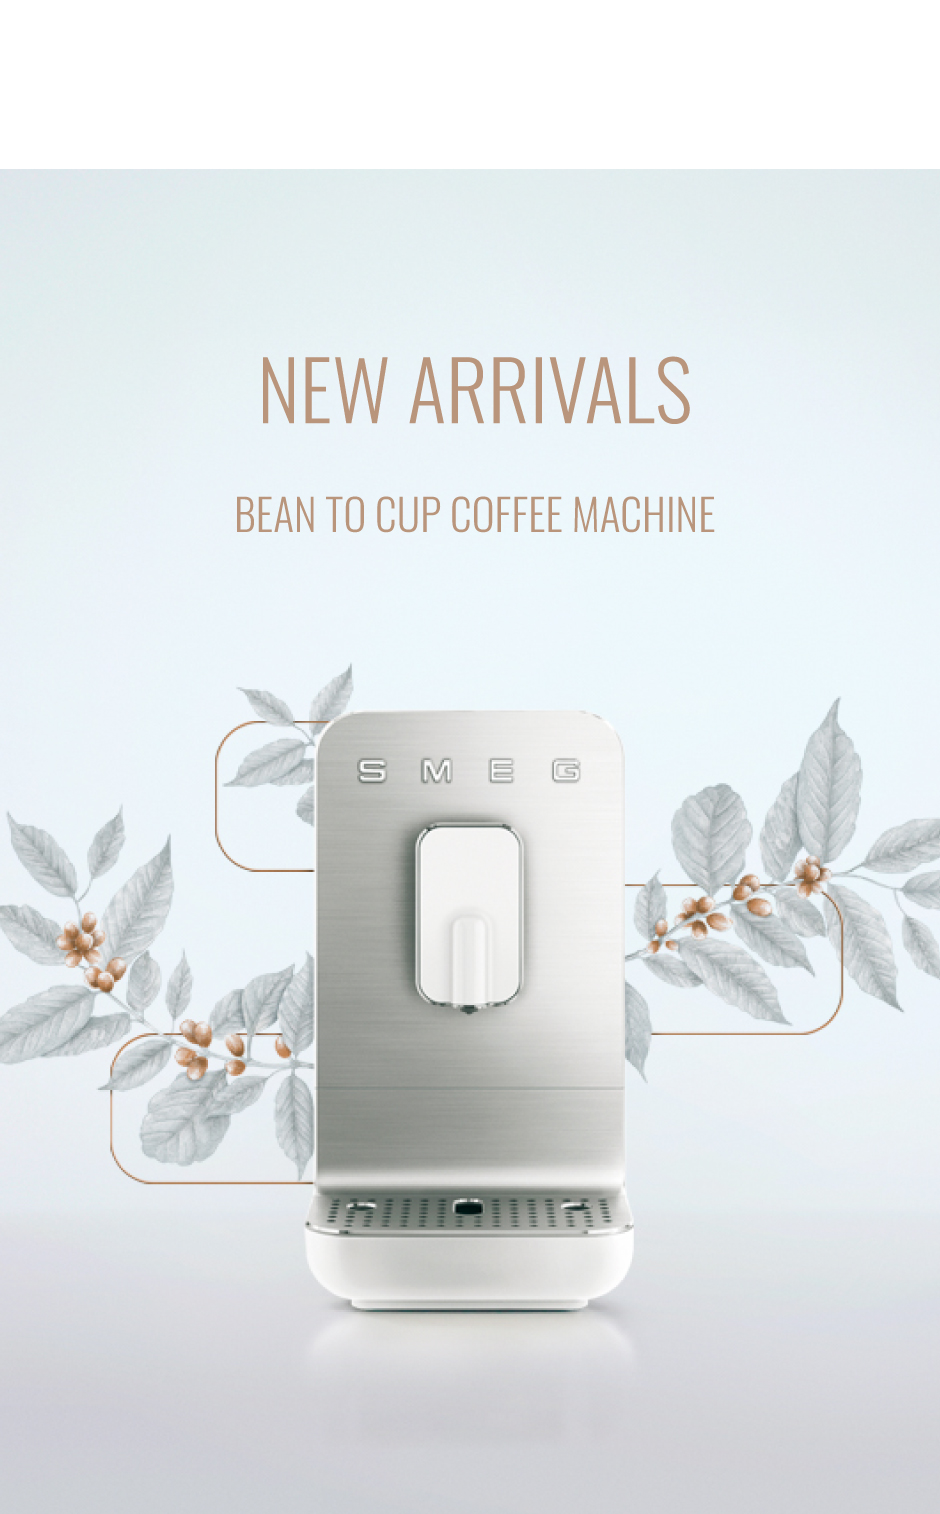 BEAN TO CUP COFFEE MACHINE